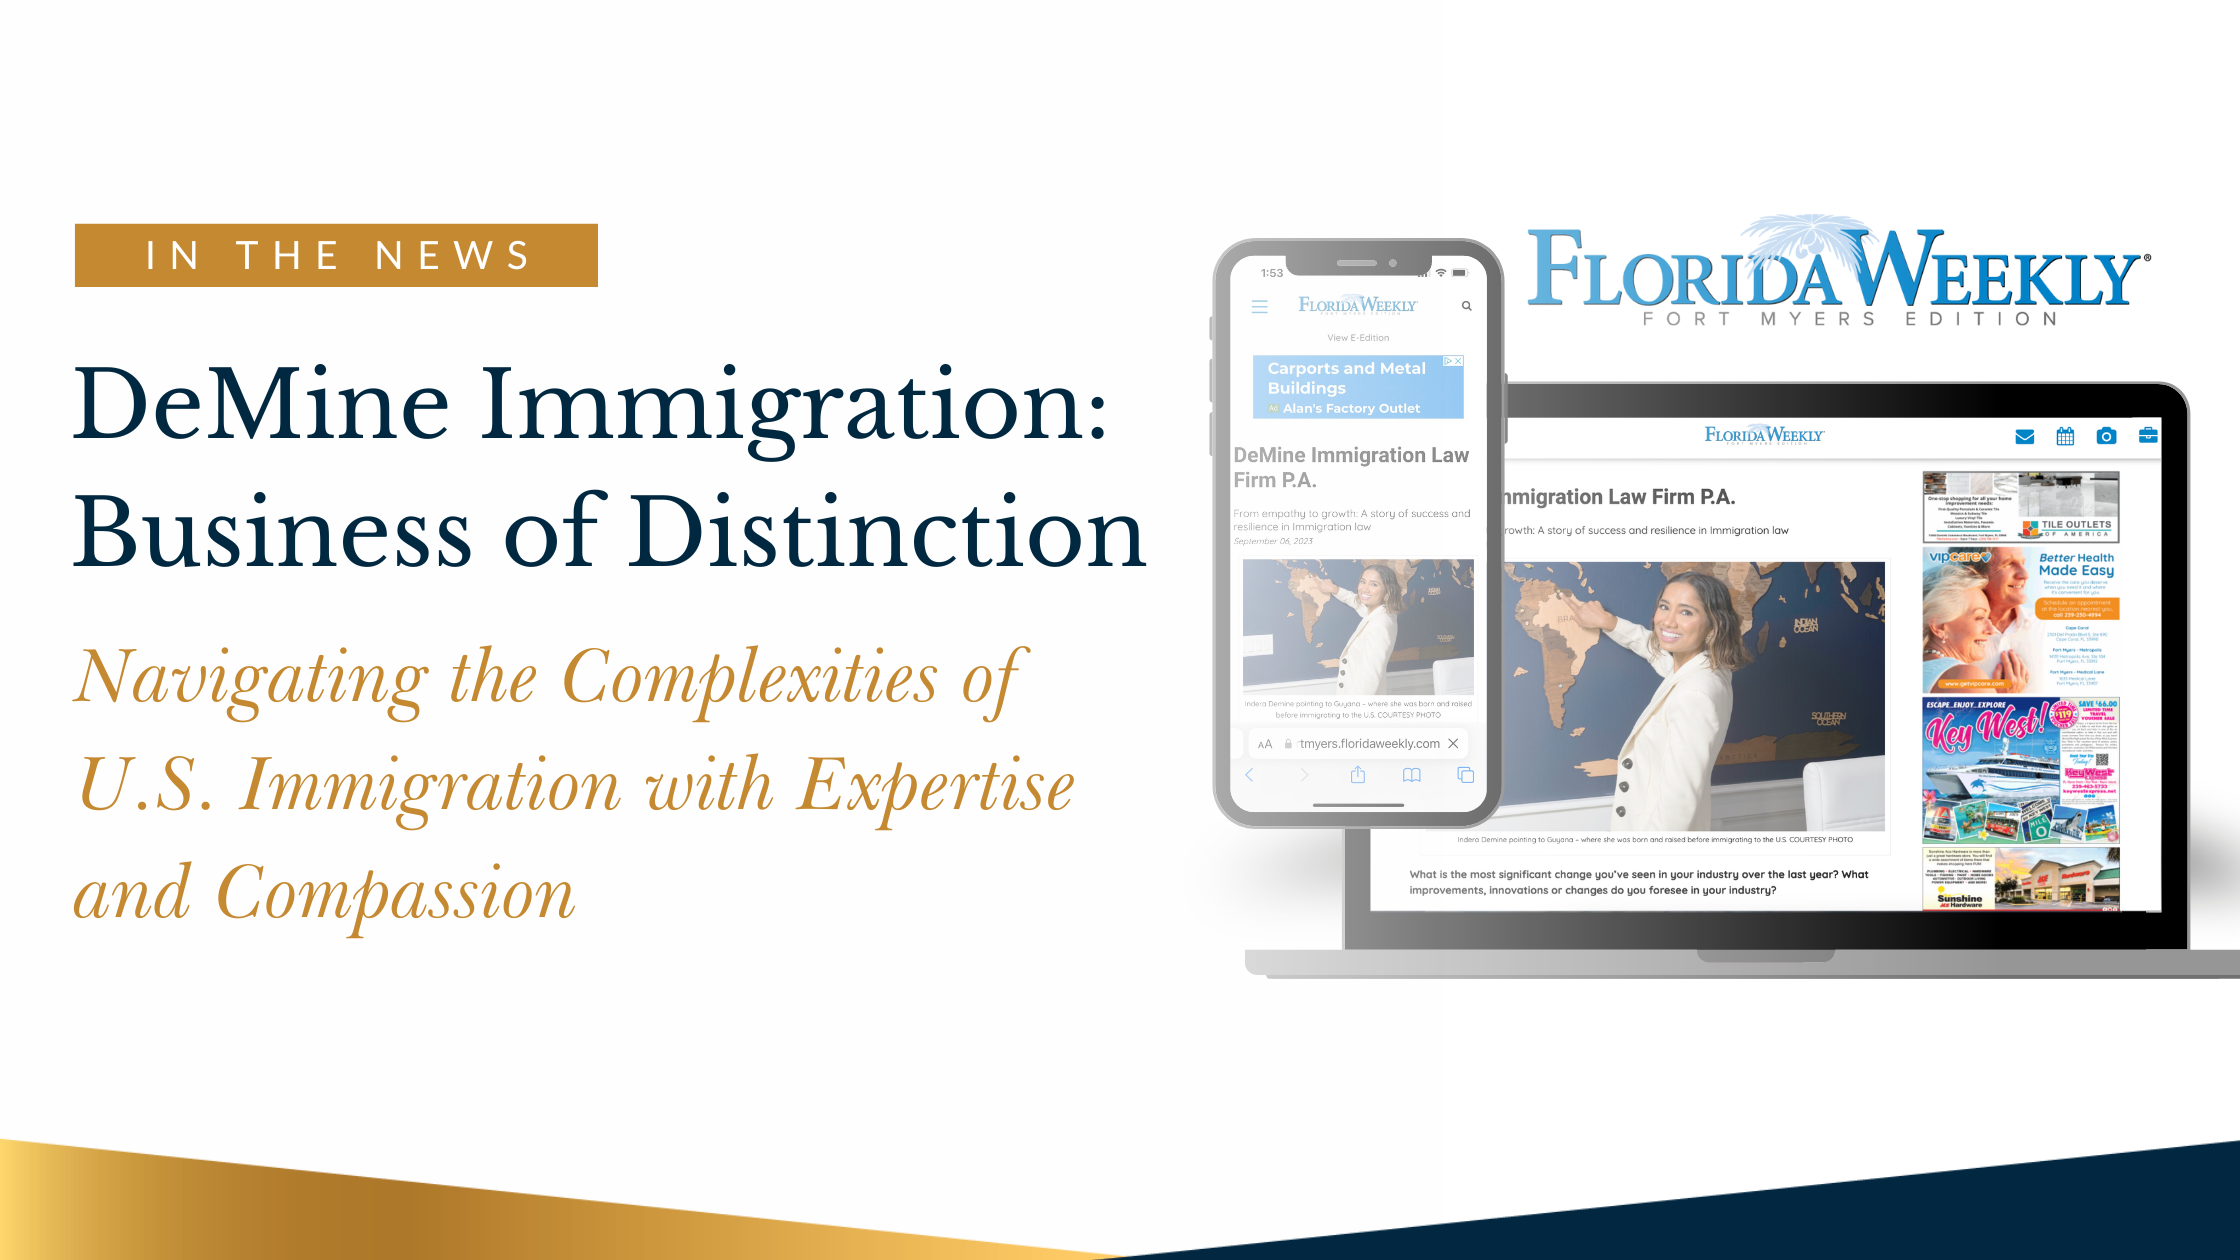 DeMine Immigration Law Firm: Recognized as a Business of Distinction